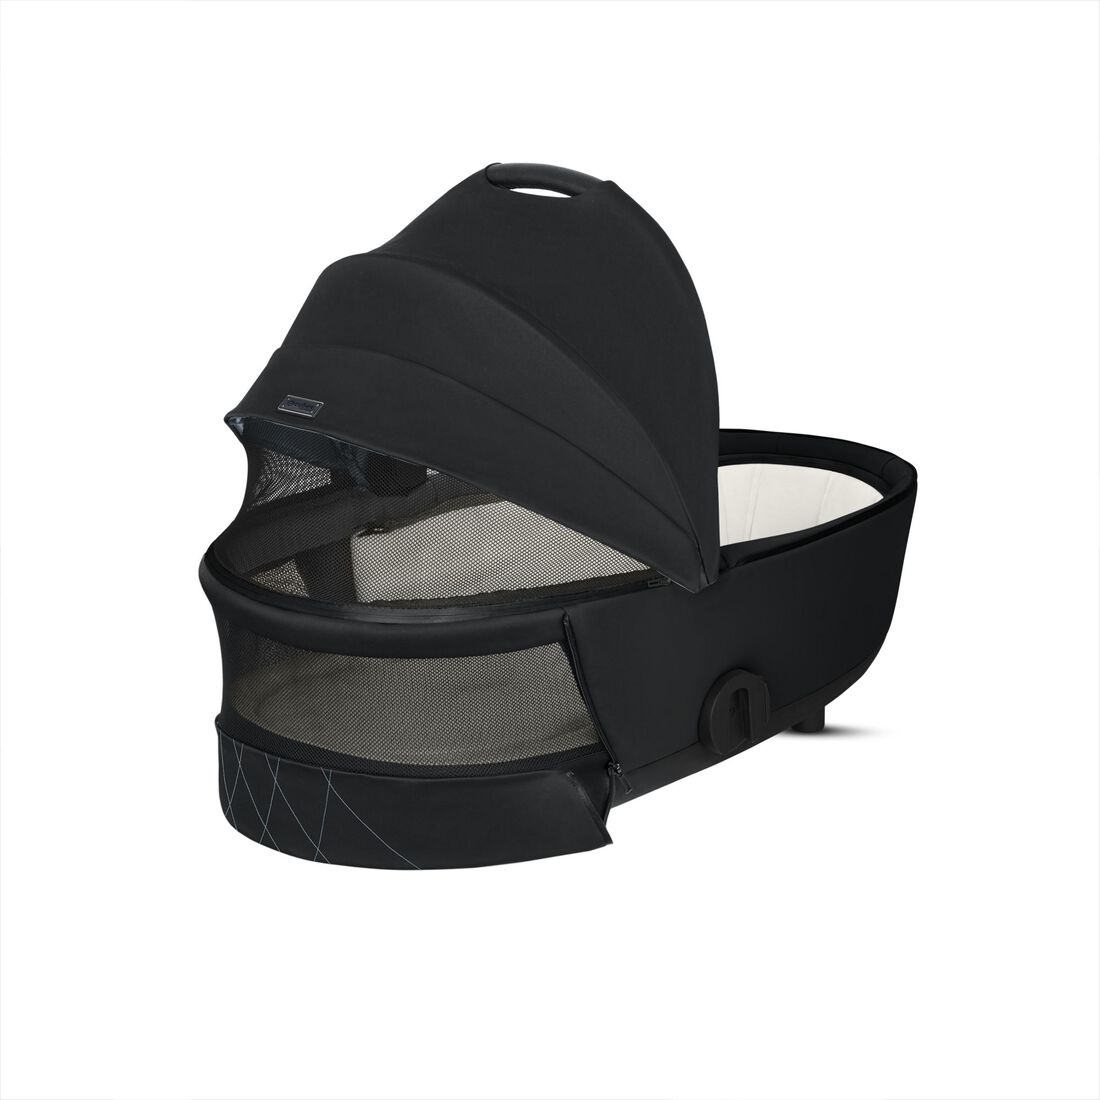 CYBEX Mios Lux Carry Cot - Deep Black in Deep Black large